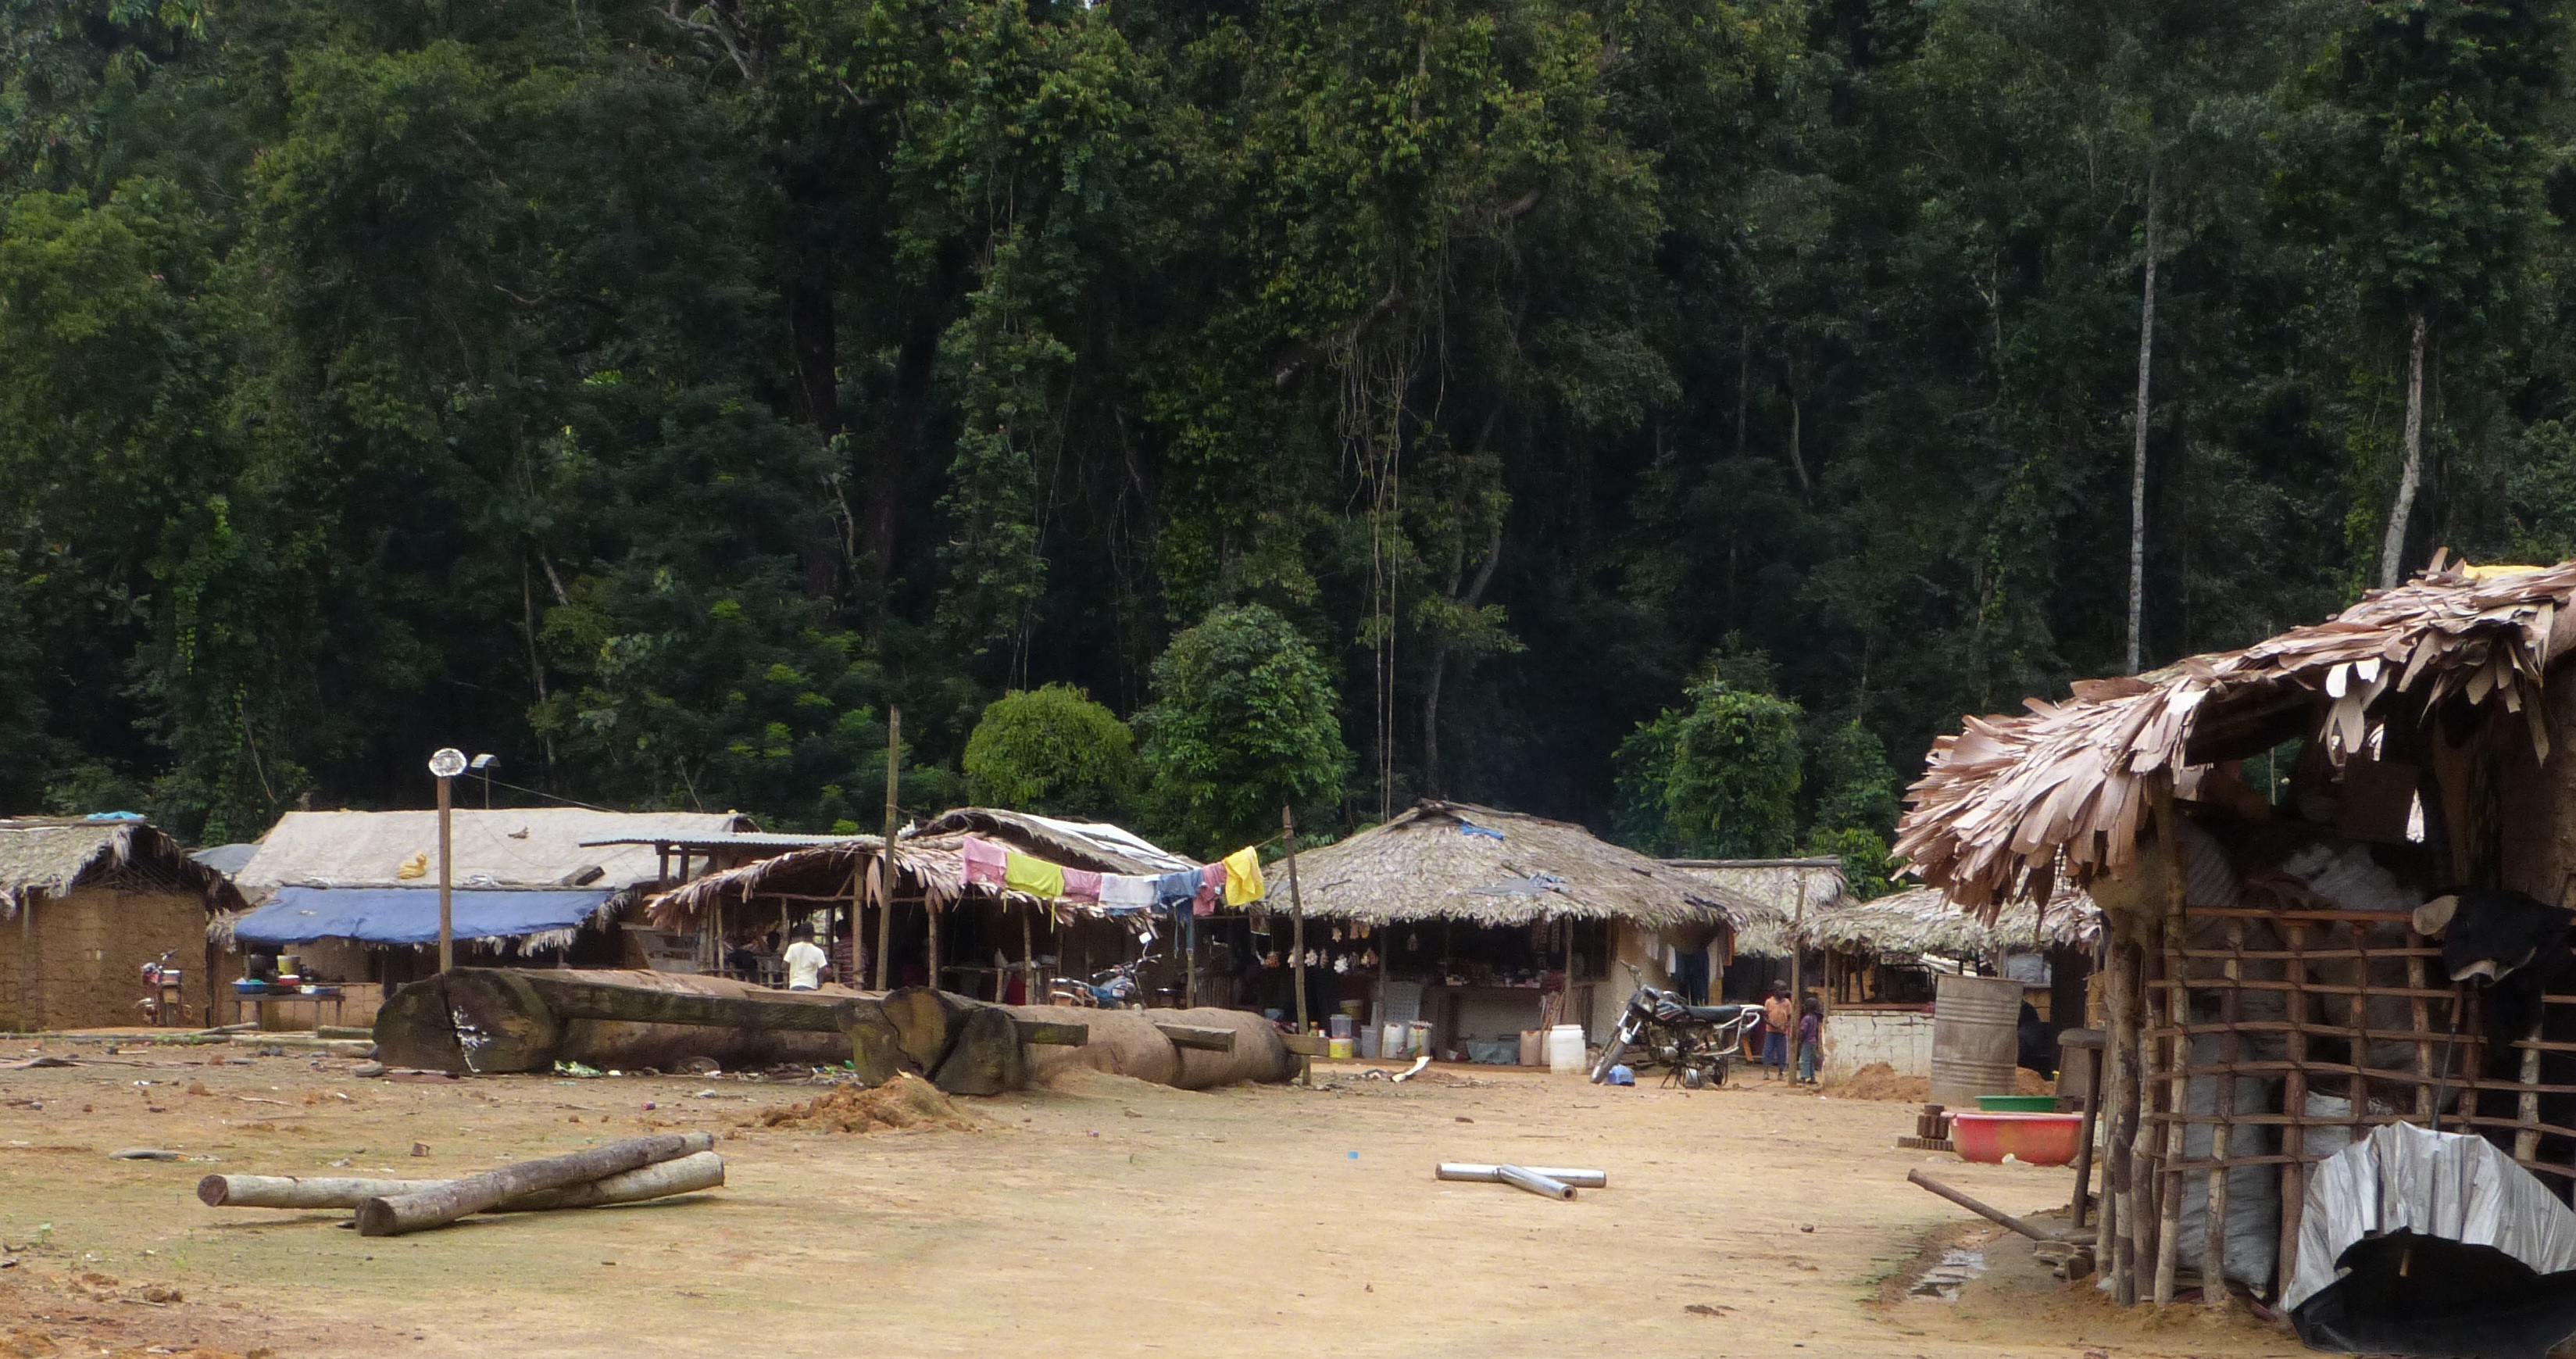 Illegal loggers’ camp, subsequently used by informal miners.